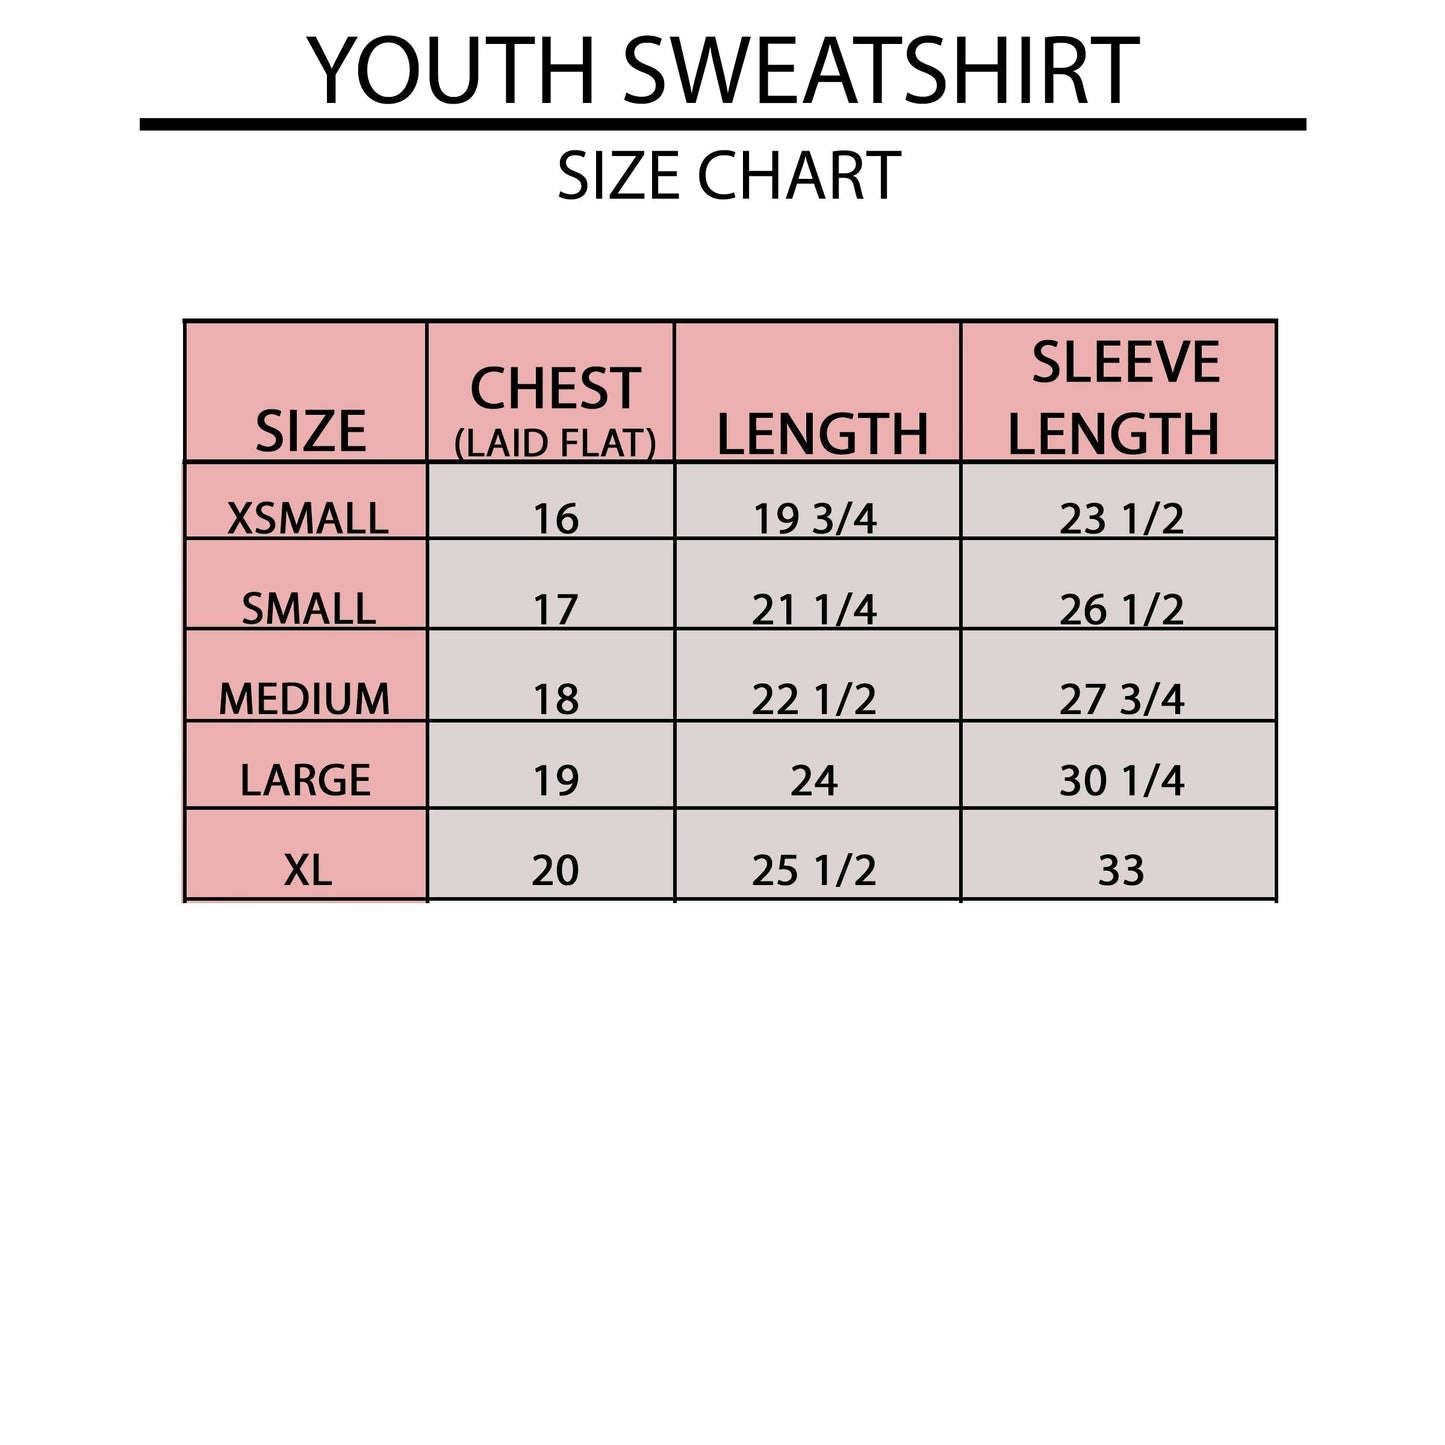 Real Thick And Sprucy | Youth Sweatshirt